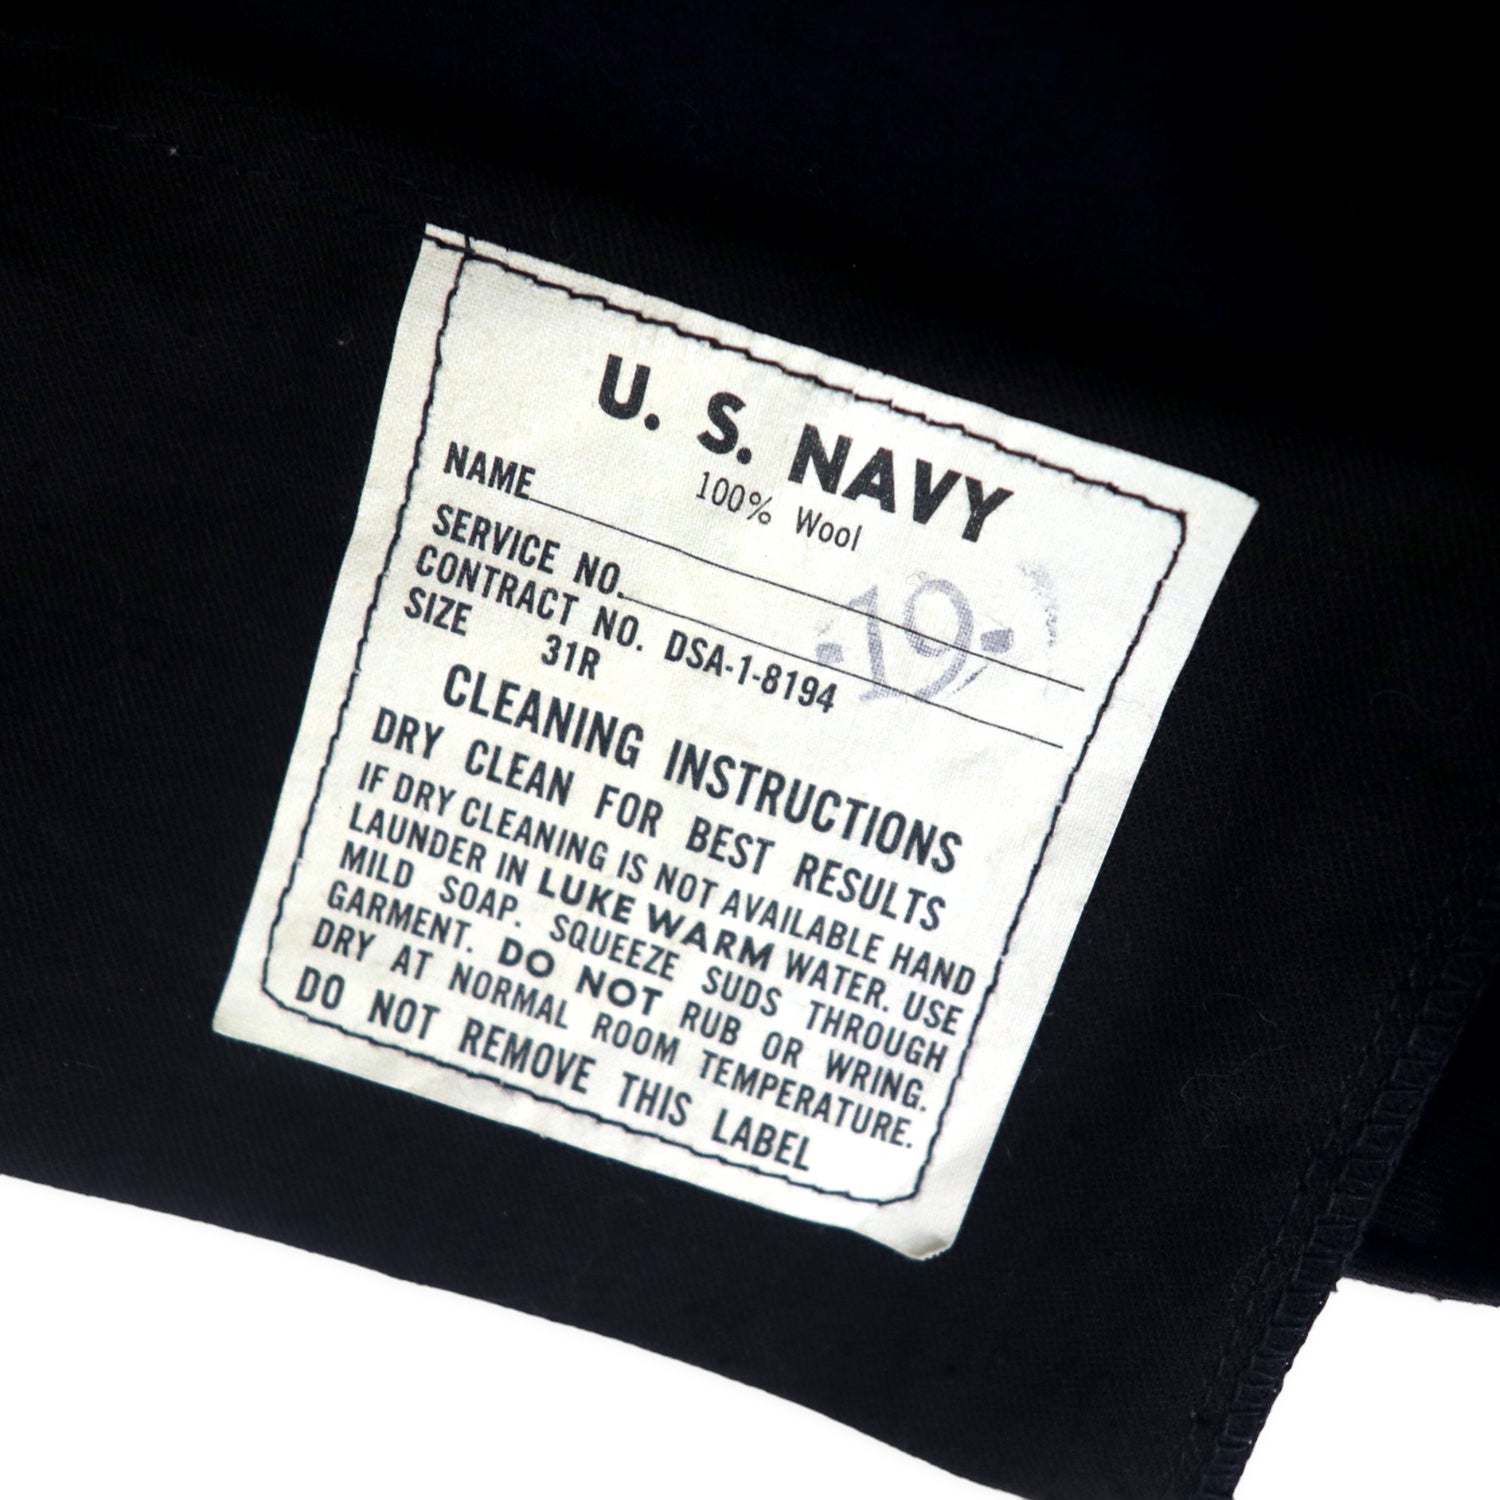 US Navy 13 button wide sailor PANTS 31R Navy Melton Wool Military 